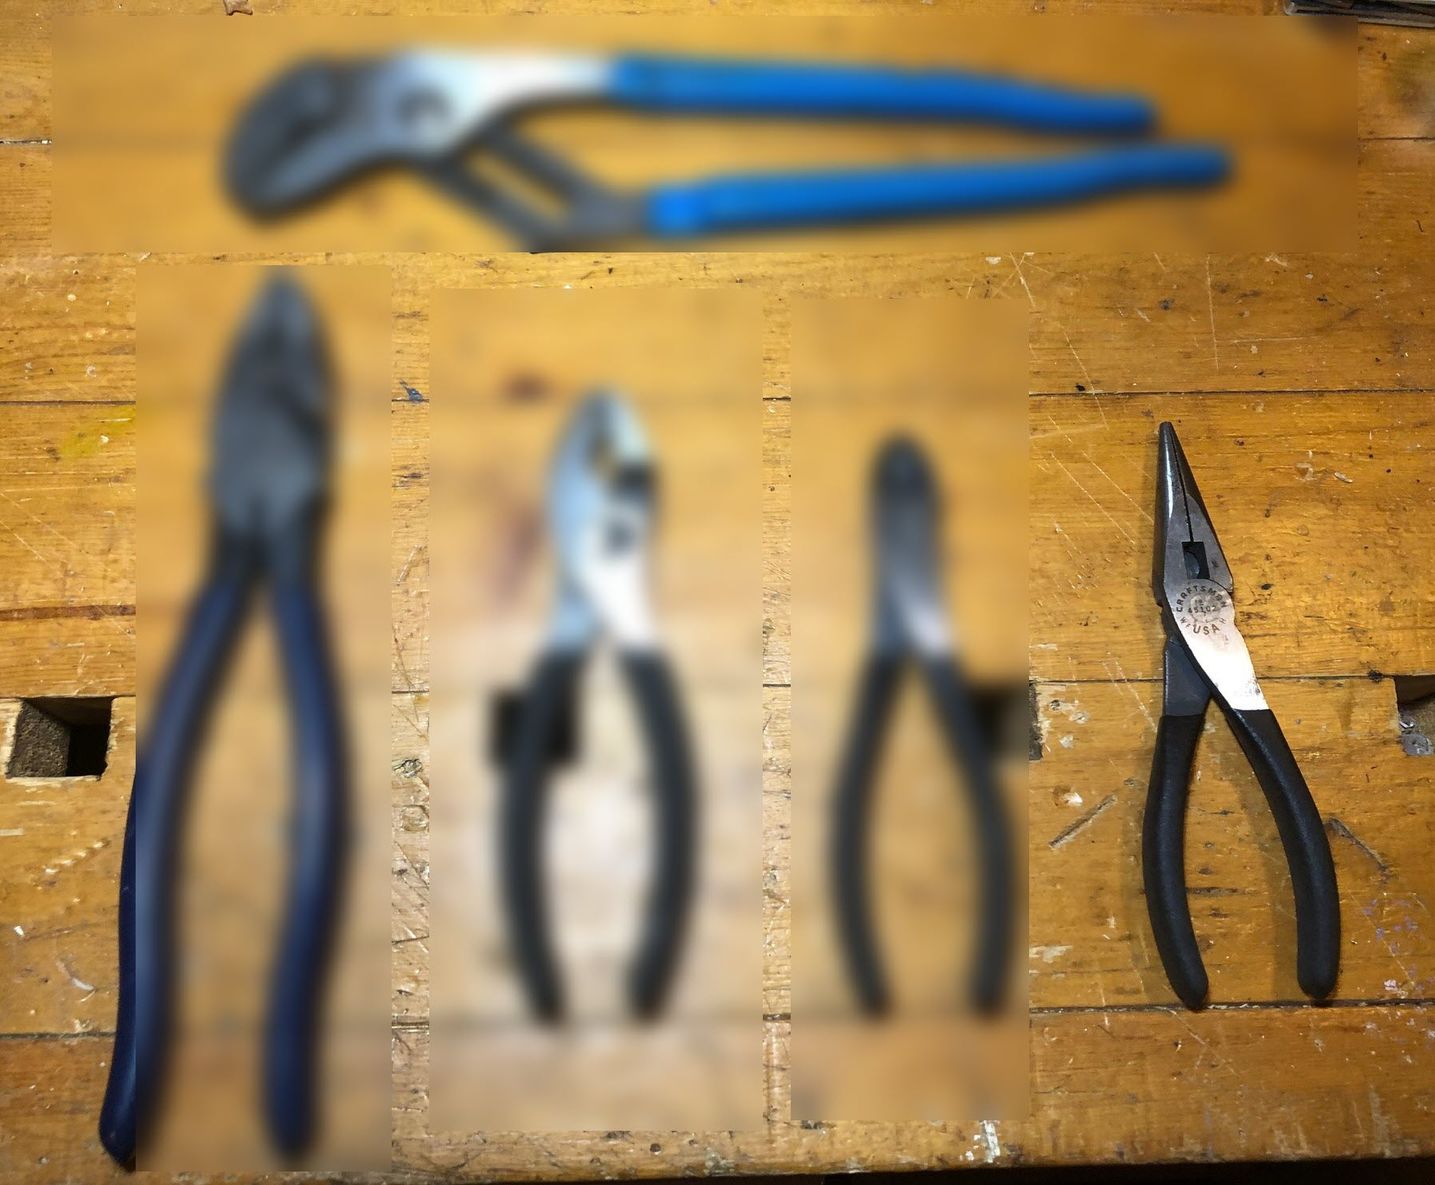 Craftsman needle nose pliers on the right side